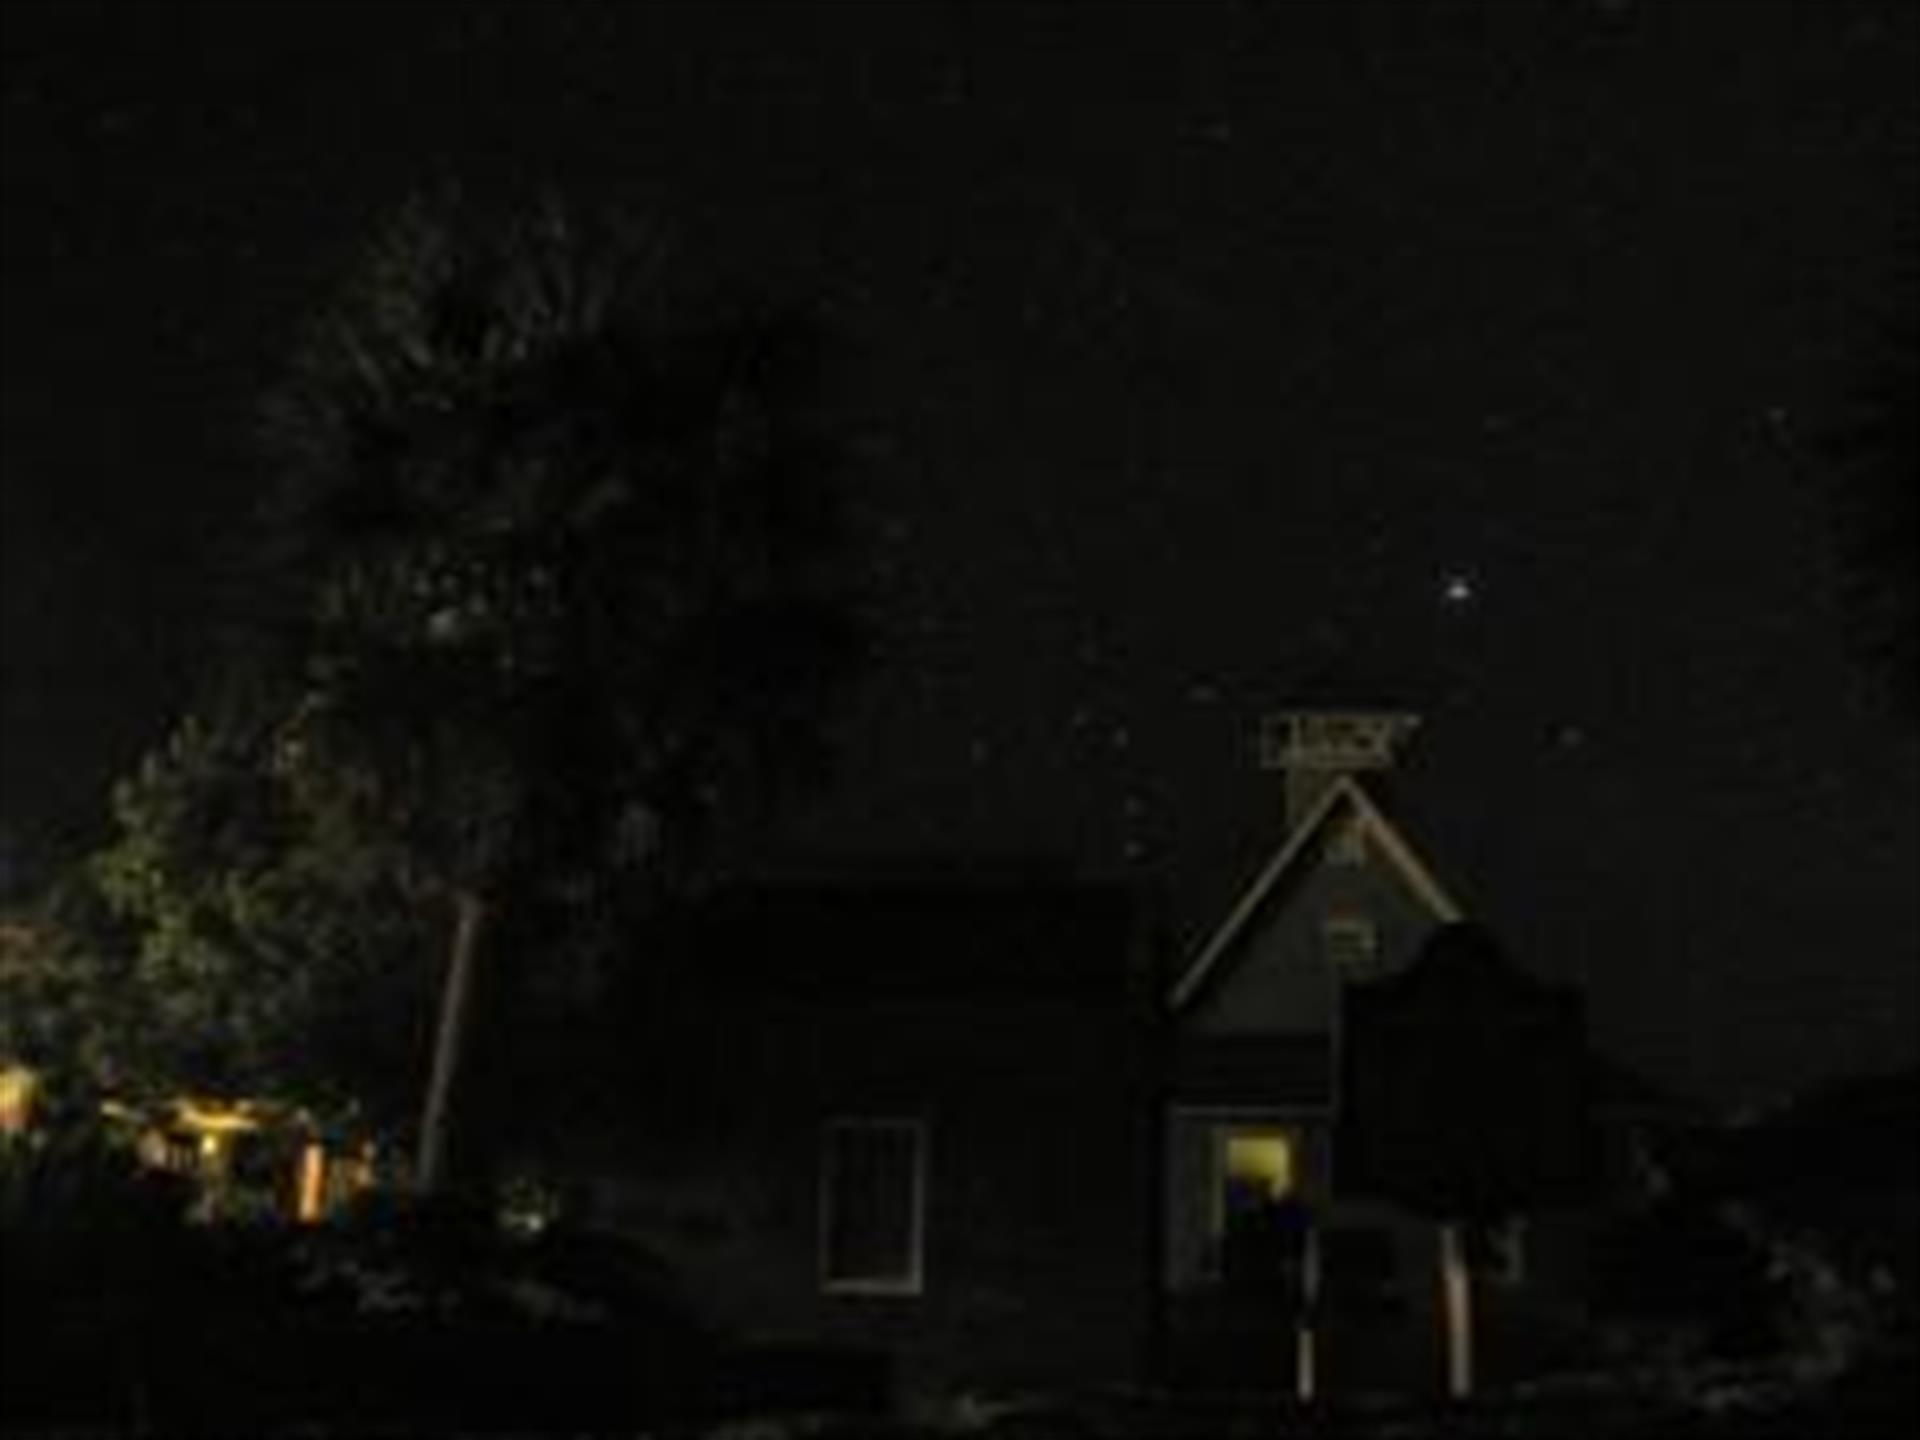 The stars emerging over the Bald Head Island Conservancy.